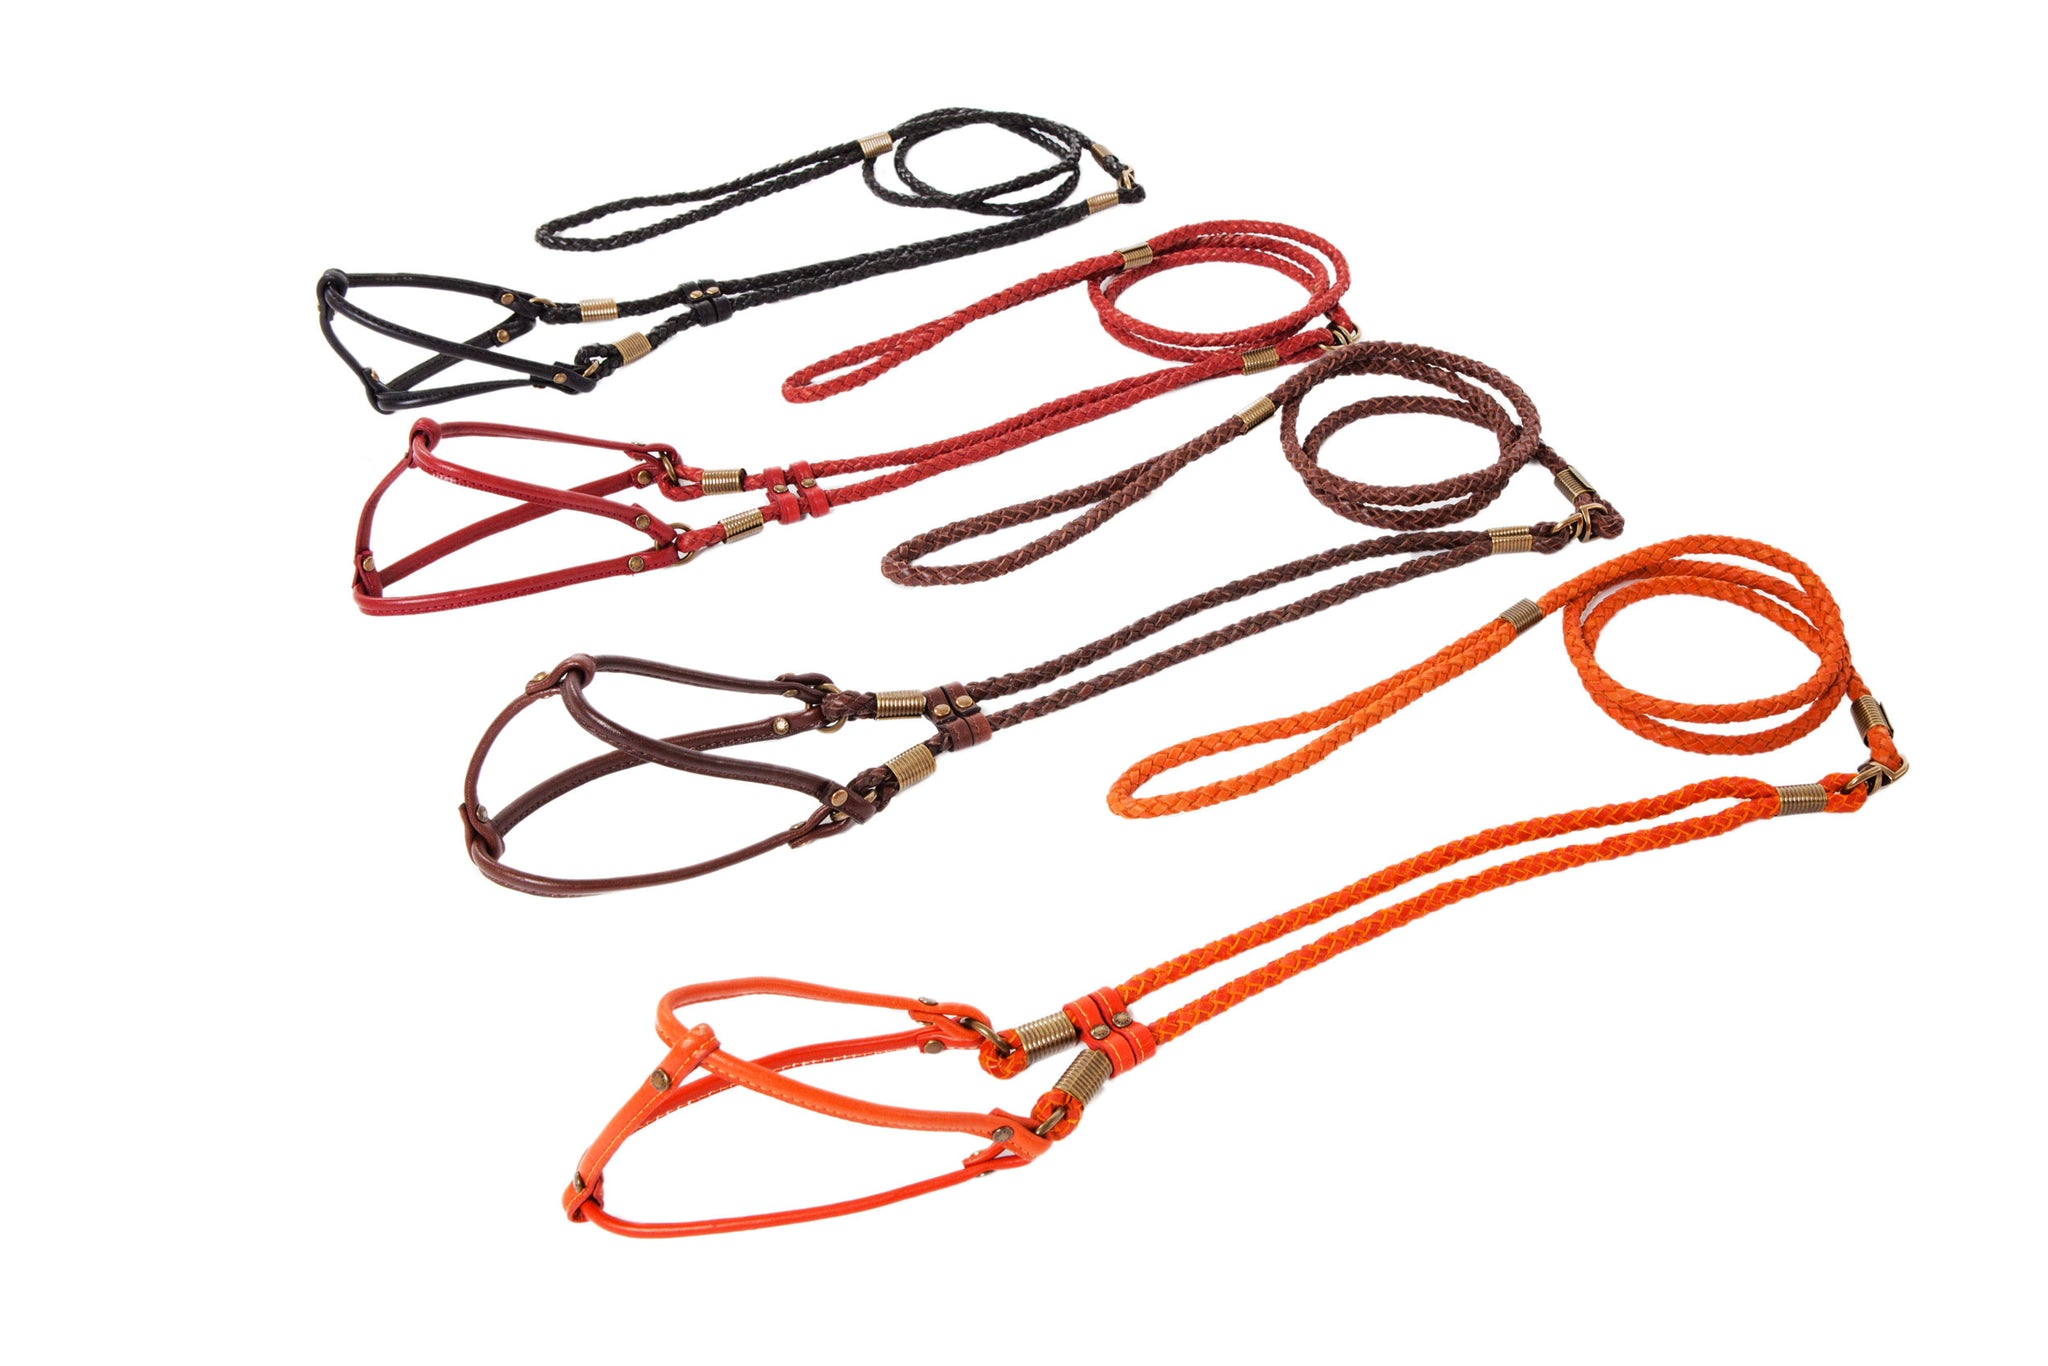 Braided & Flat Leather Step-In Harness - All-in-One Lead & Harness - 4 Color Options